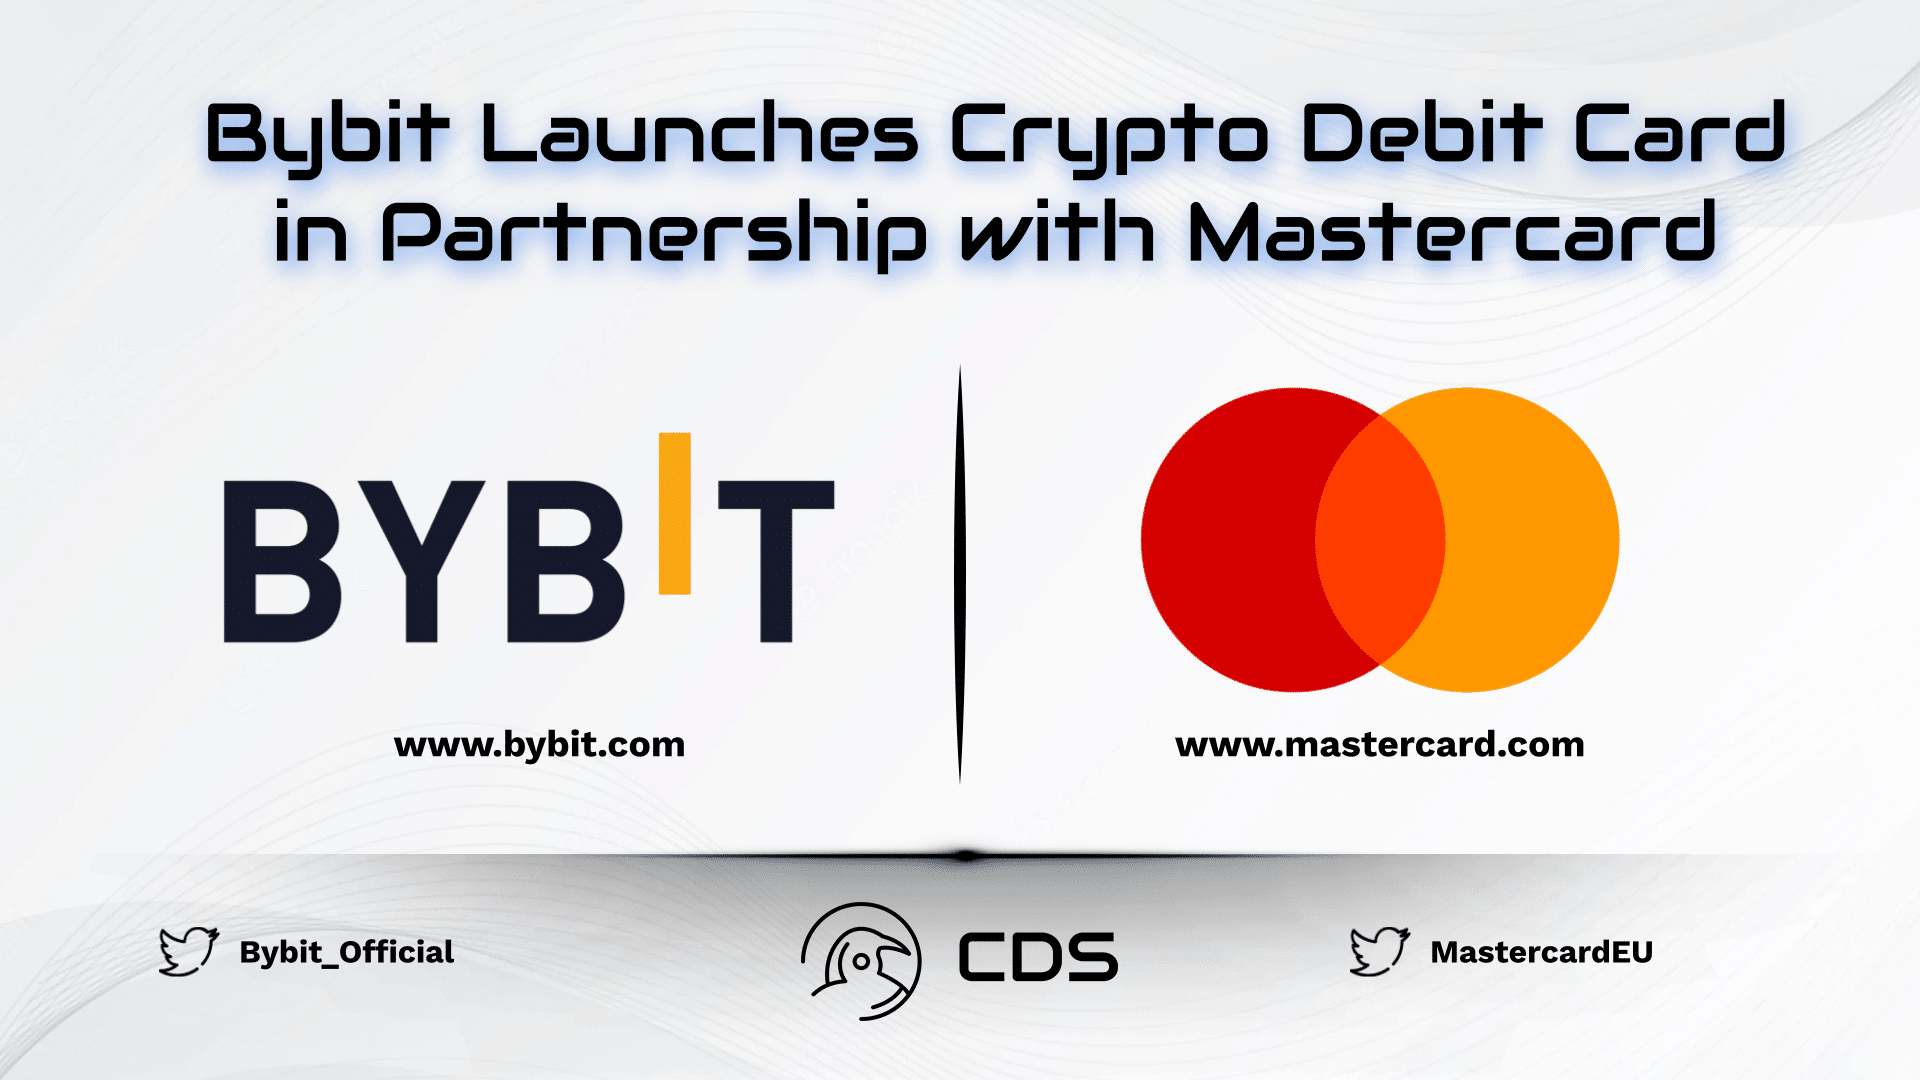 Bybit Launches Crypto Debit Card in Partnership with Mastercard